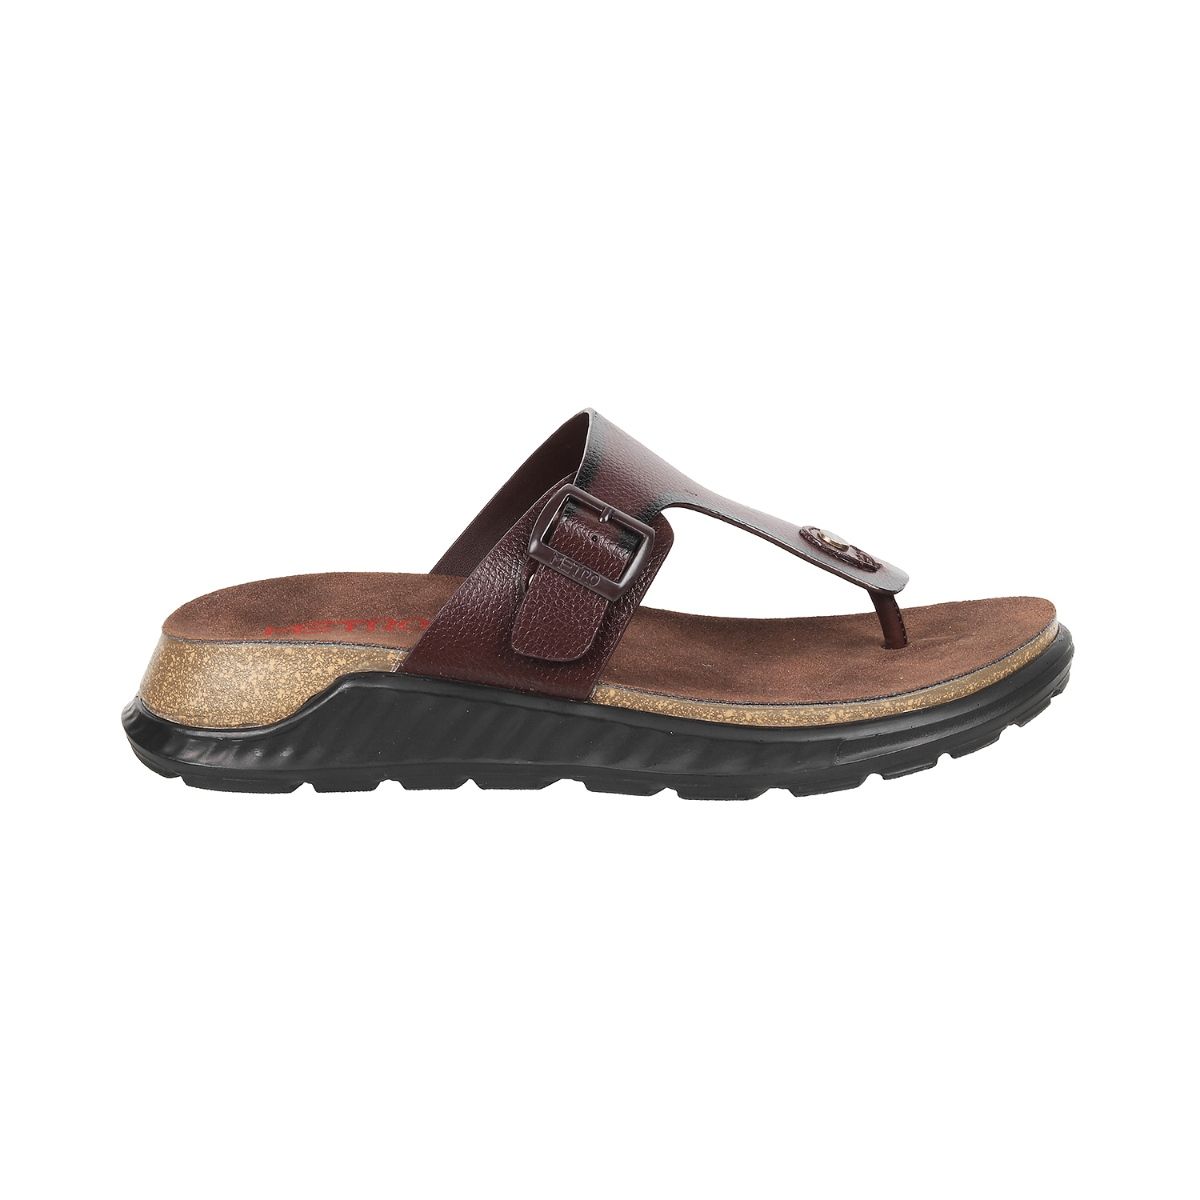 Buy Metro Kids Golden Ankle Strap Sandals from top Brands at Best Prices  Online in India | Tata CLiQ